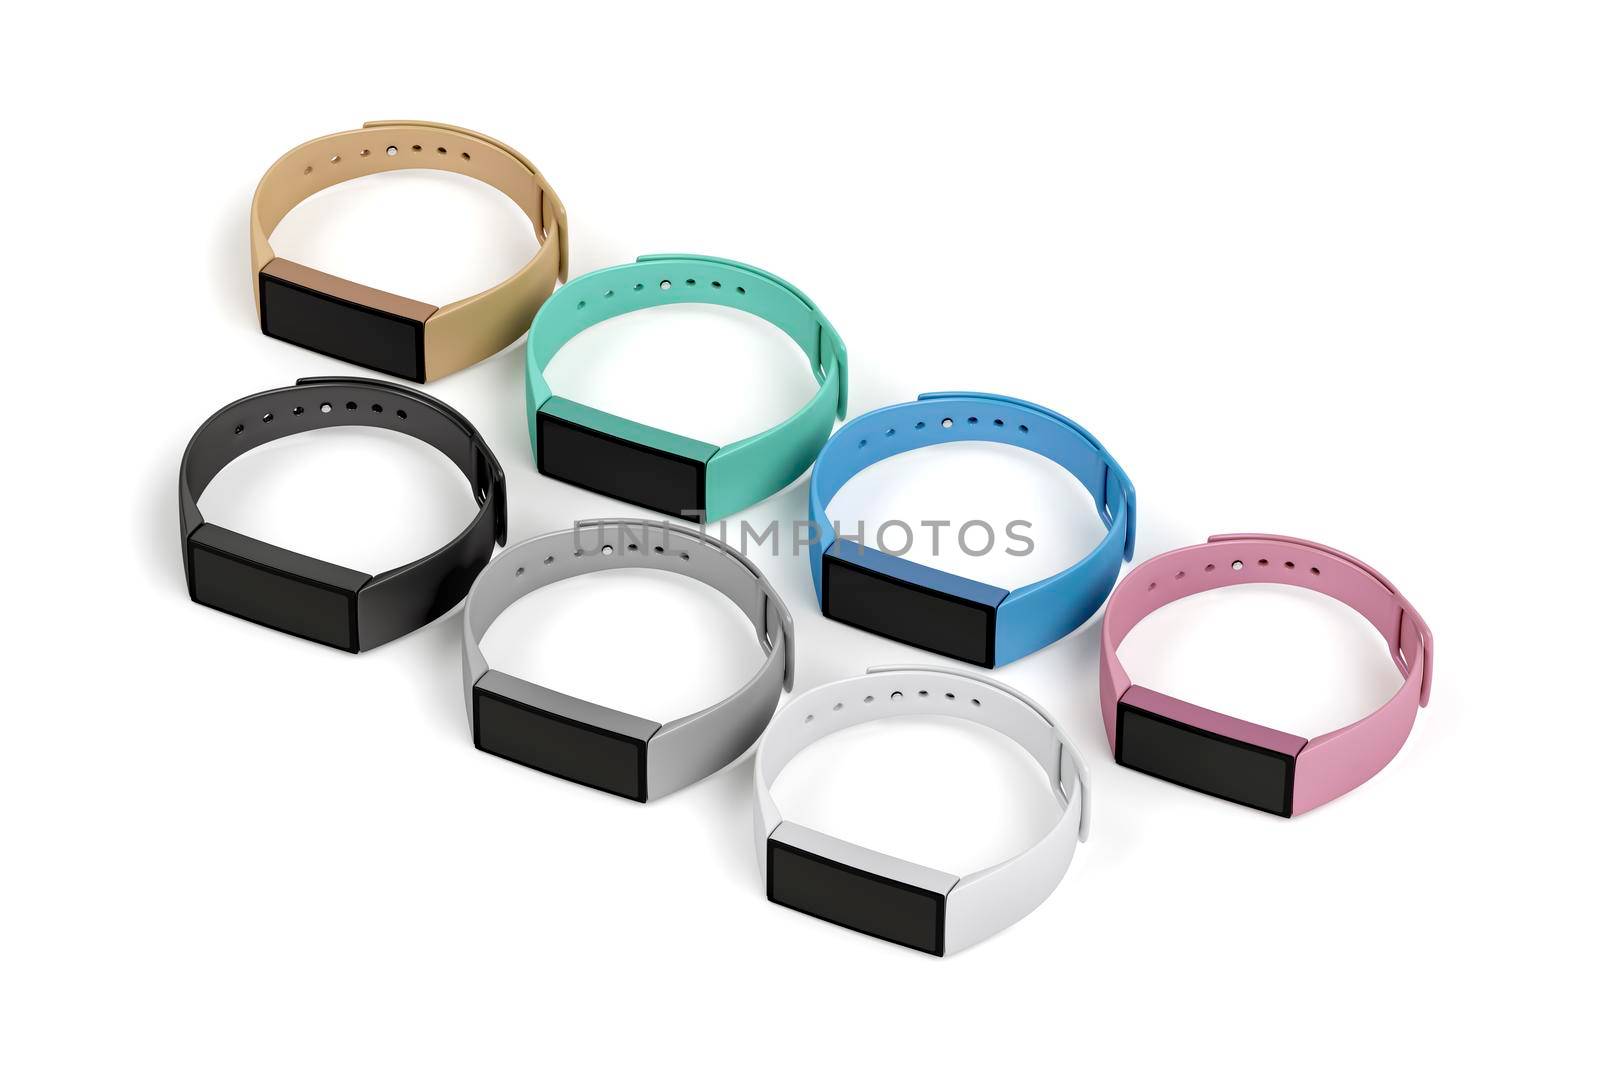 Many smartwatches with different colors by magraphics